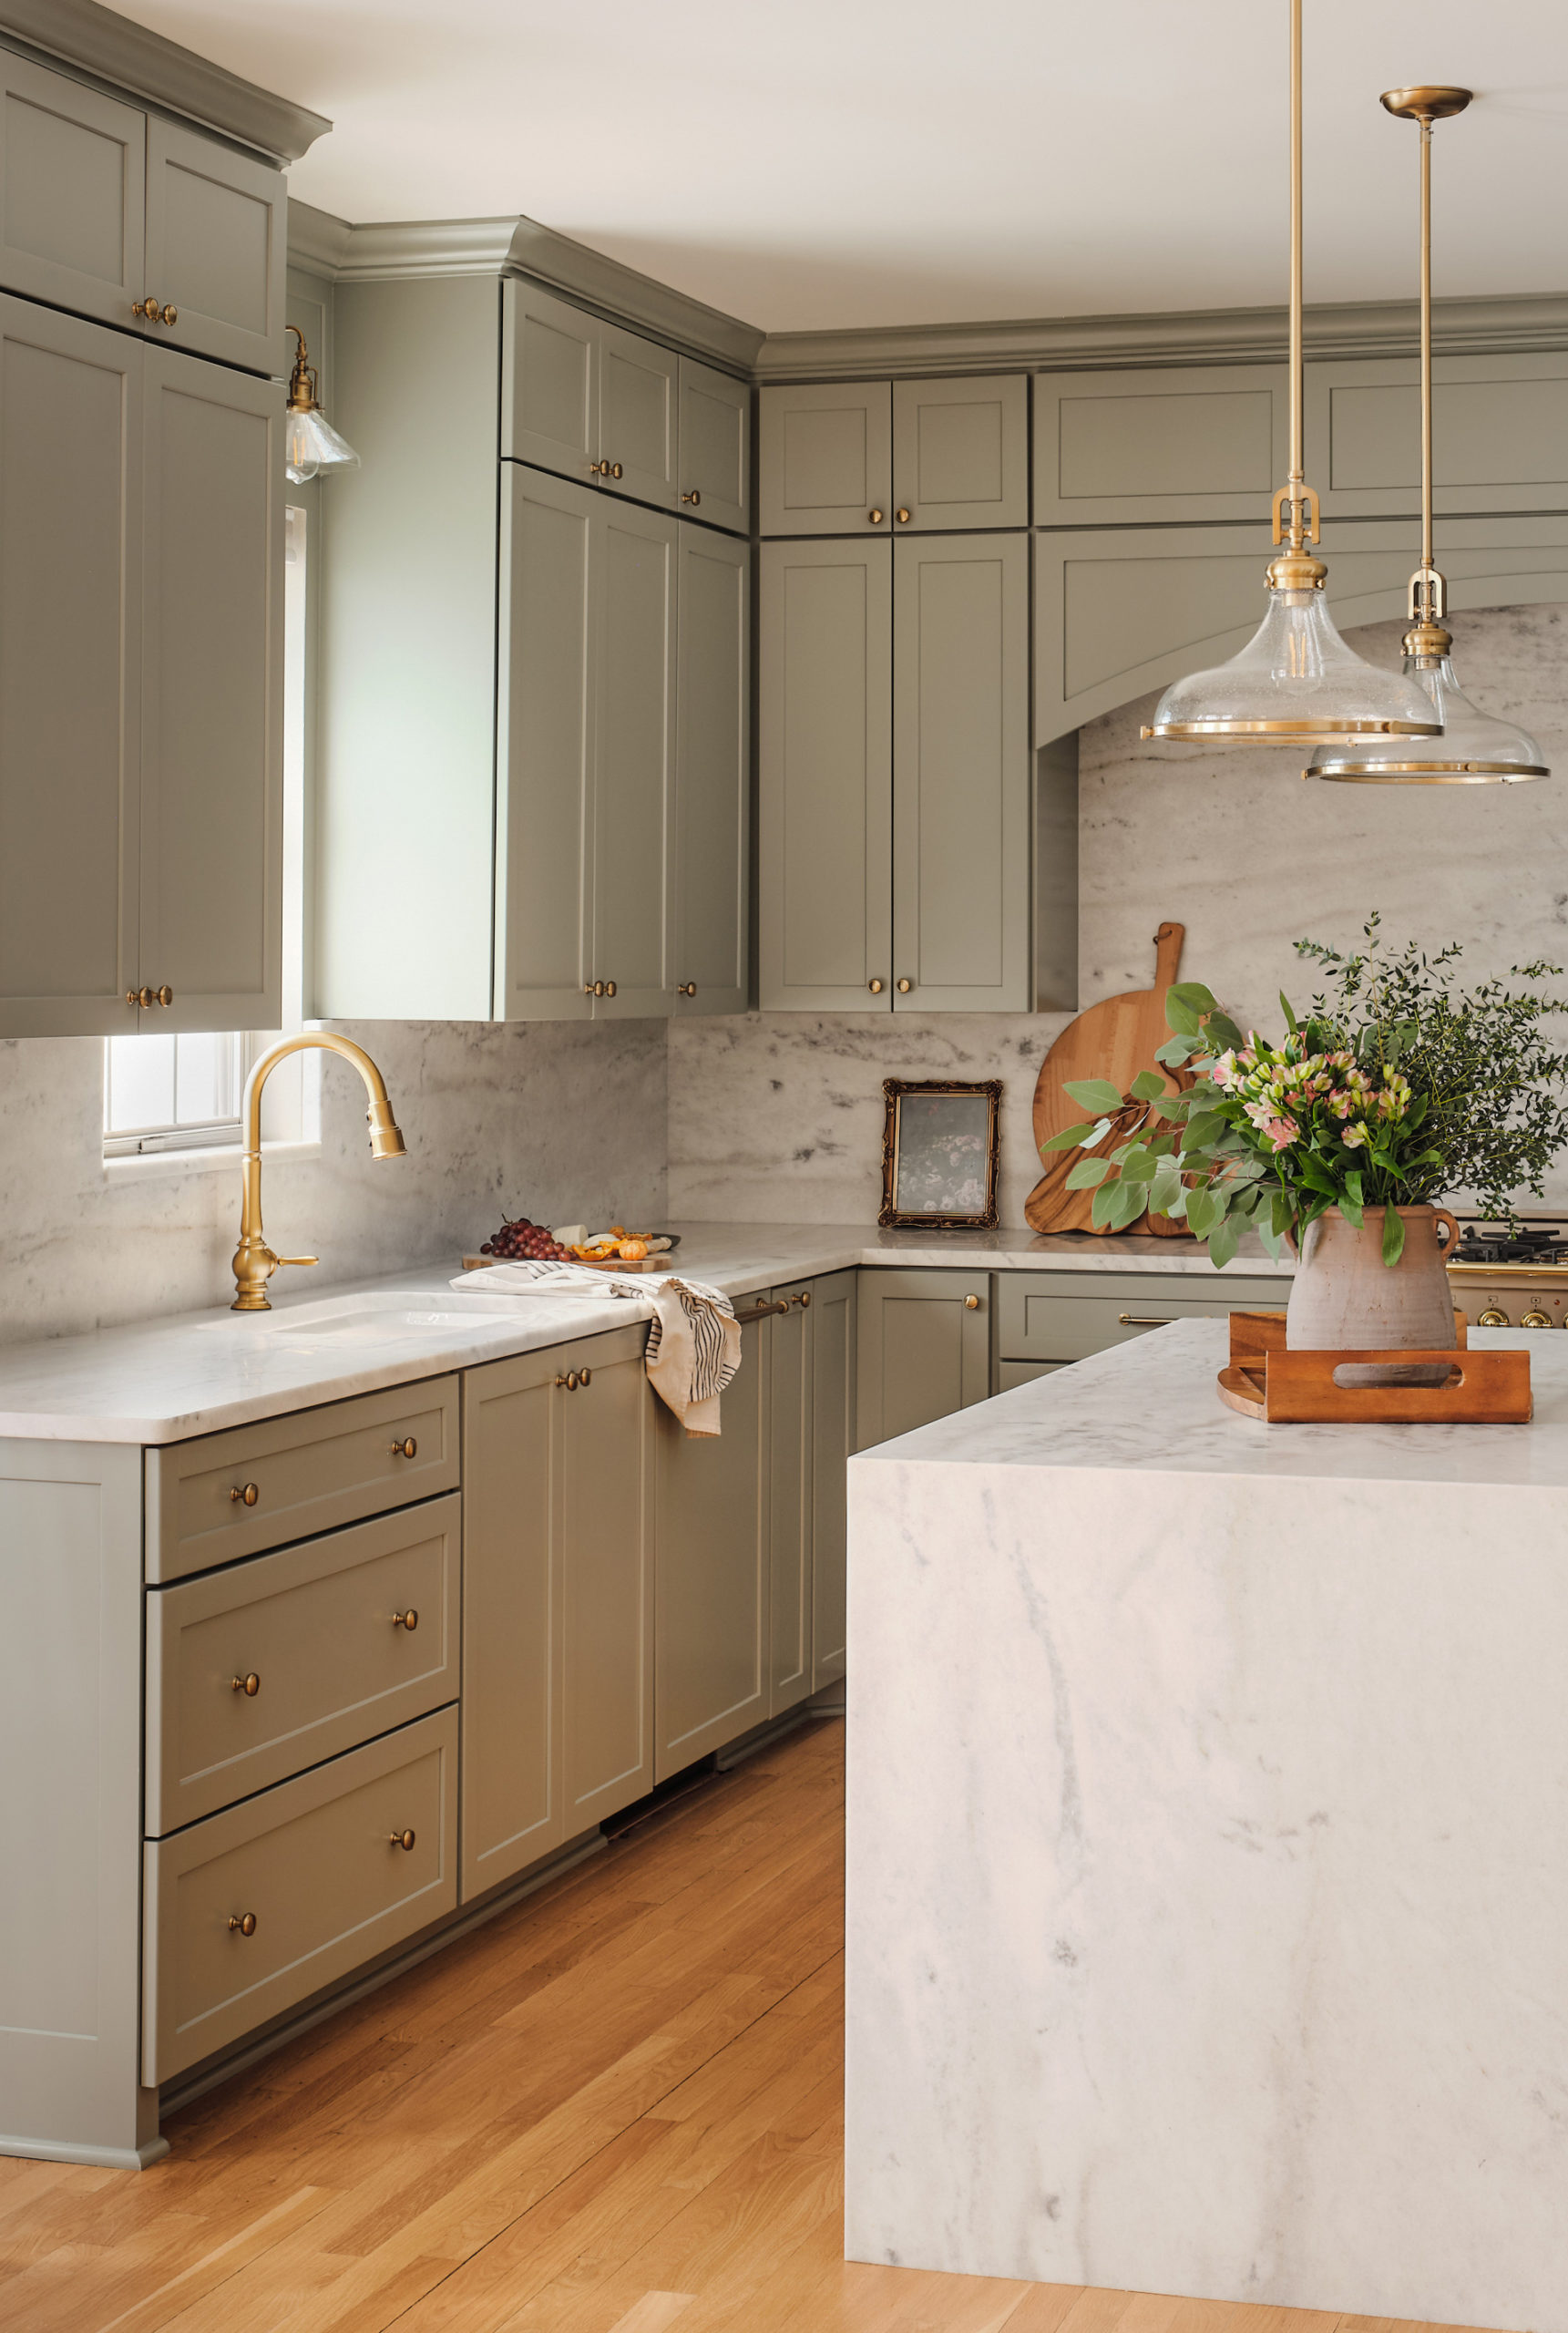 green kitchen cabinets - hardware - marble